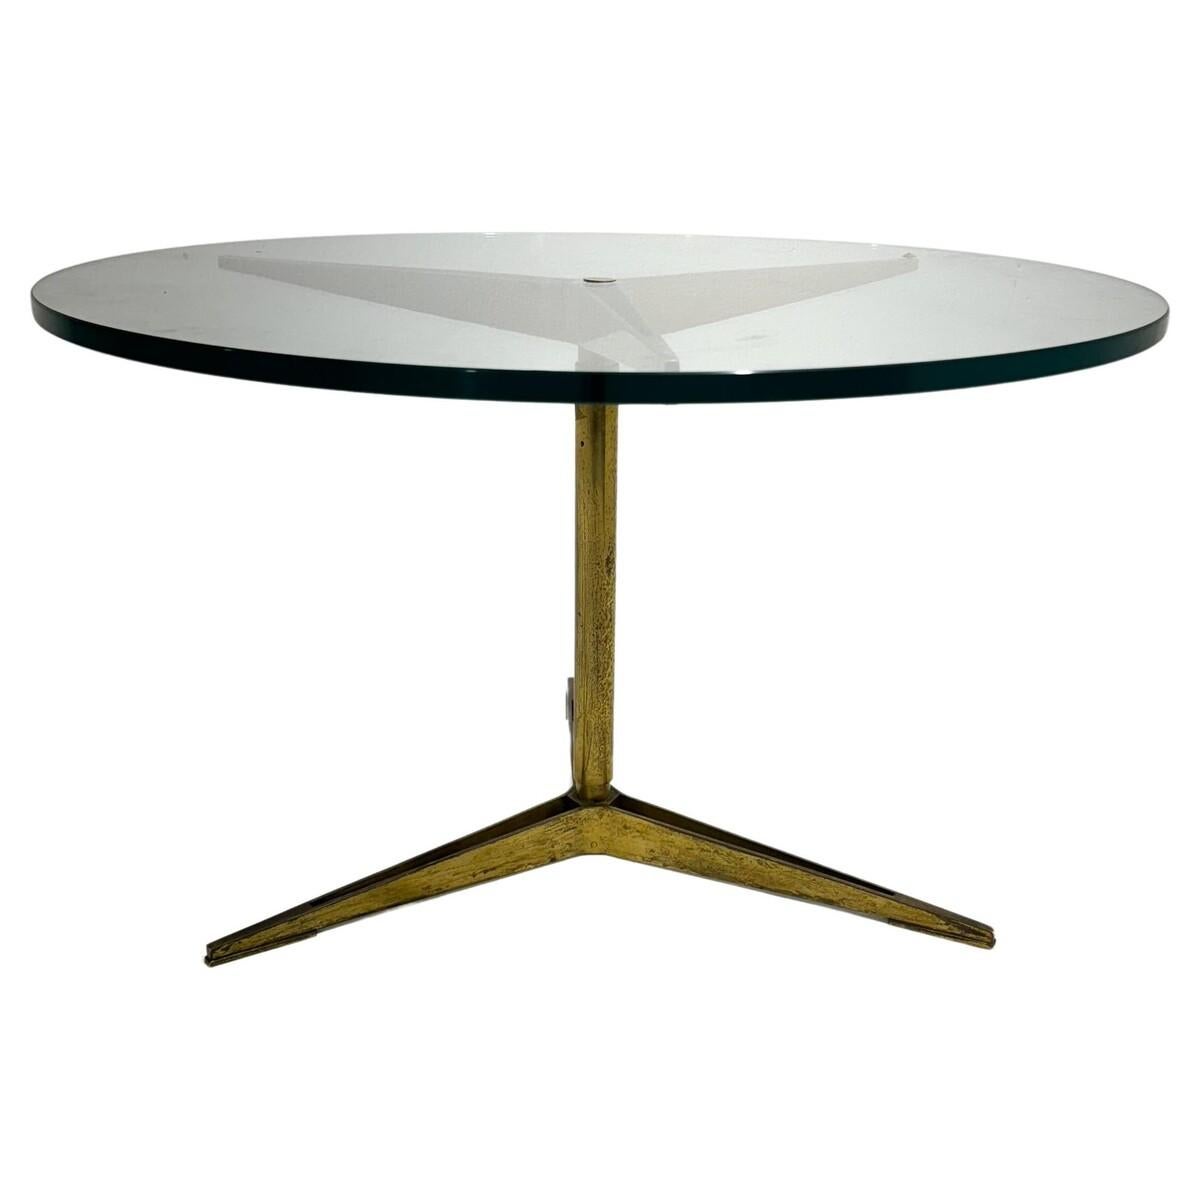 Brass Mid-Century Modern Side Table 1128 by Gio Ponti, Singer and Sons, 1950s For Sale